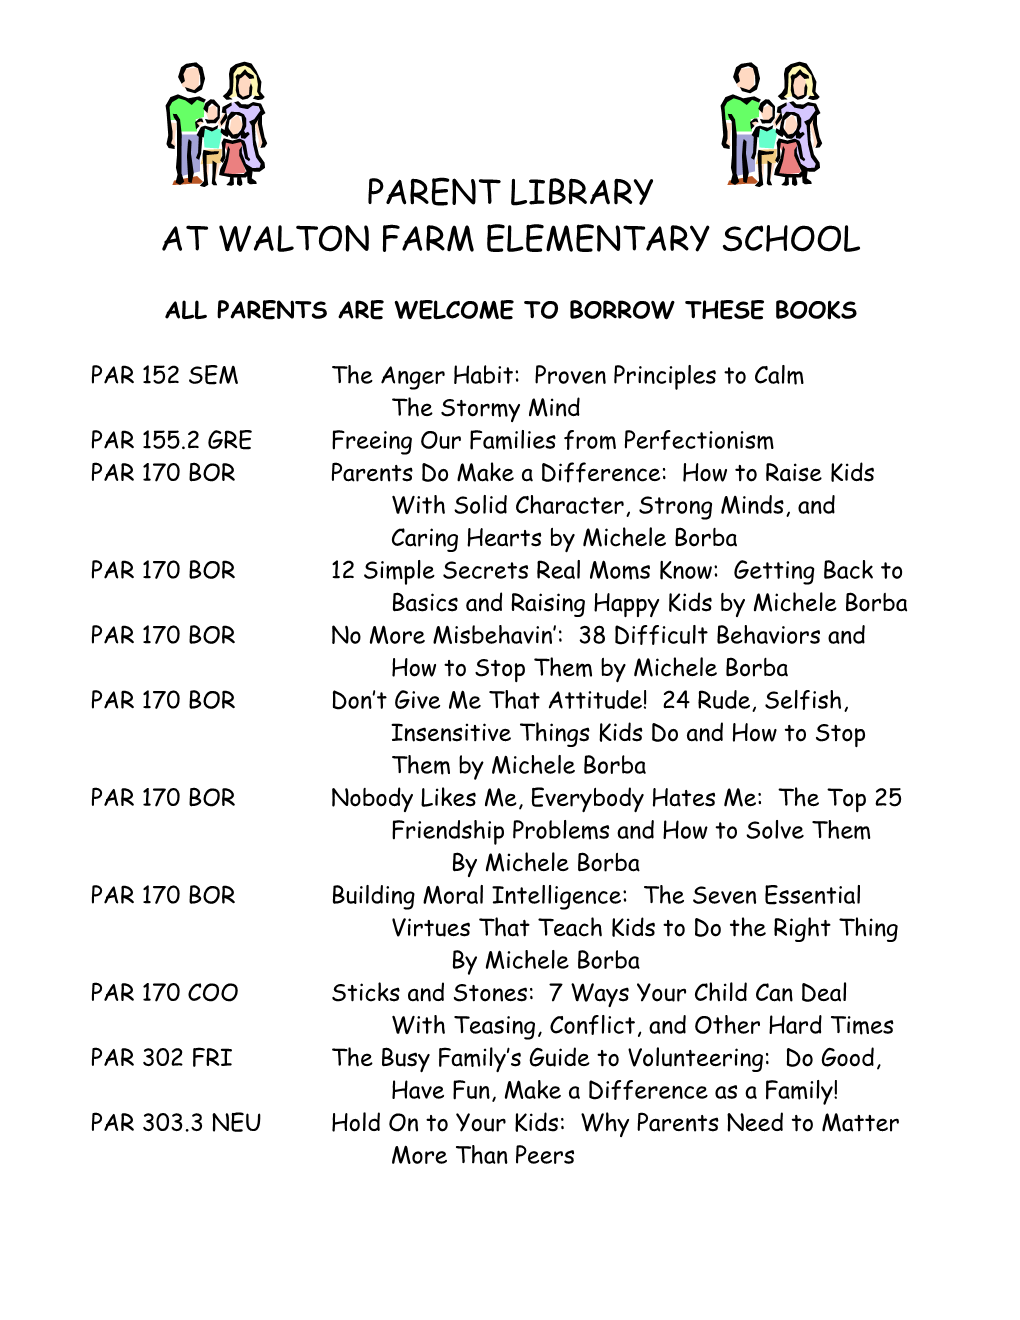 All Parents Are Welcome to Borrow These Books